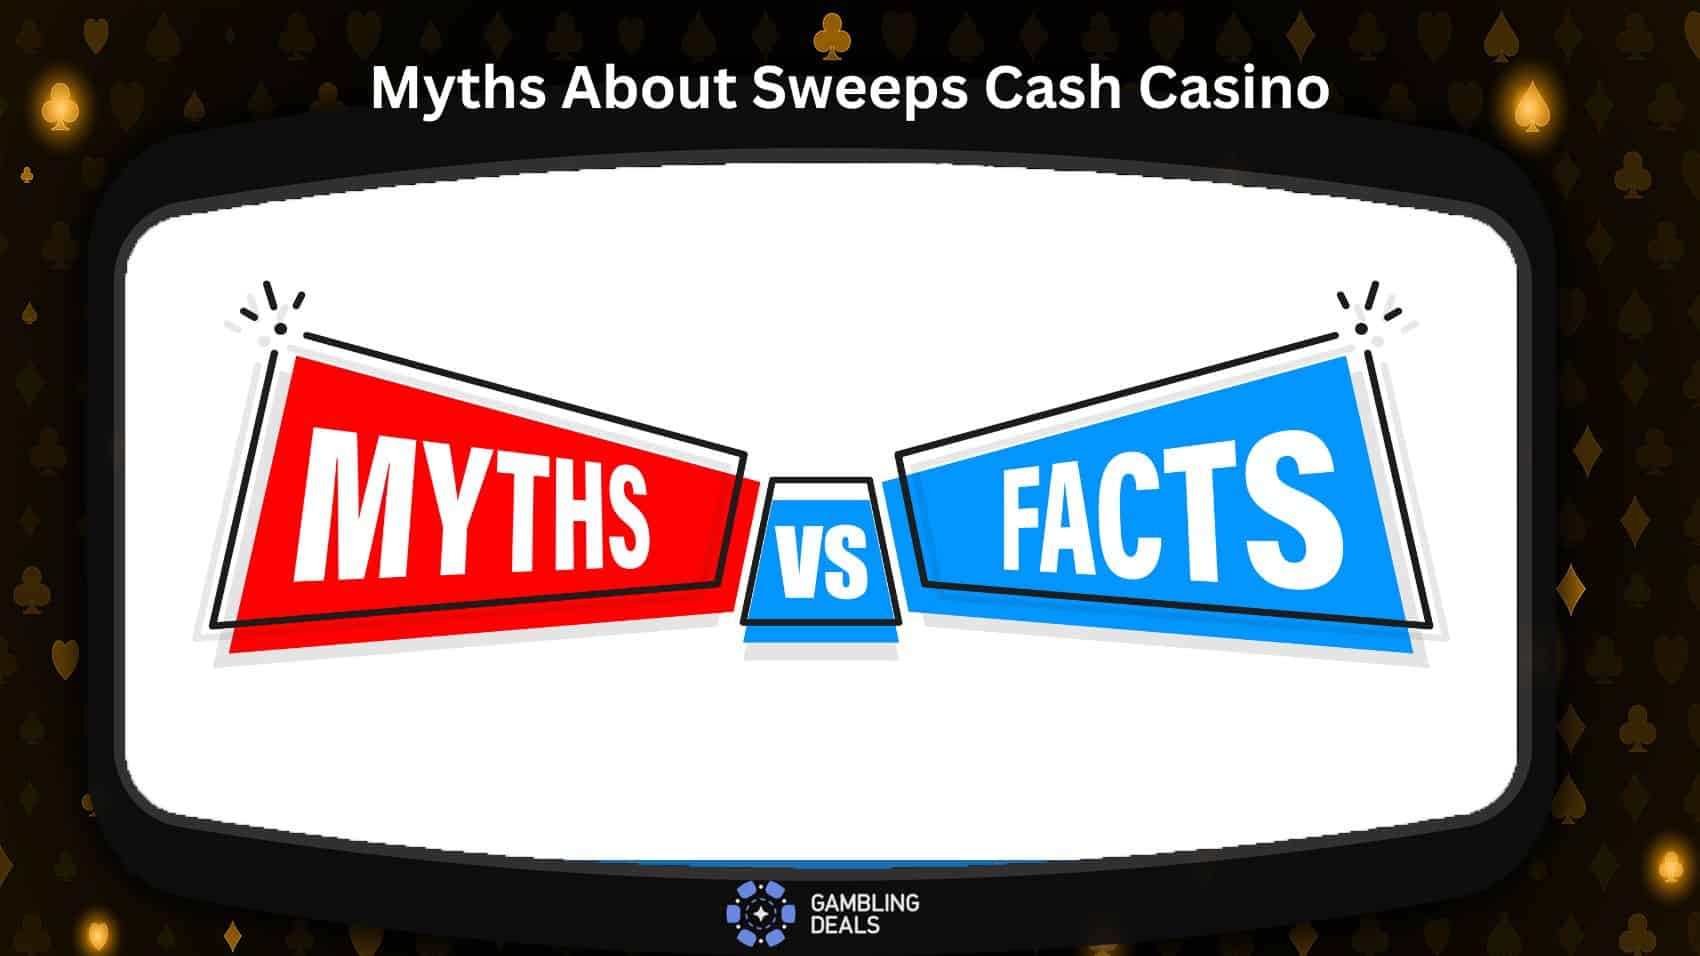 Myths About Sweeps Cash Casino